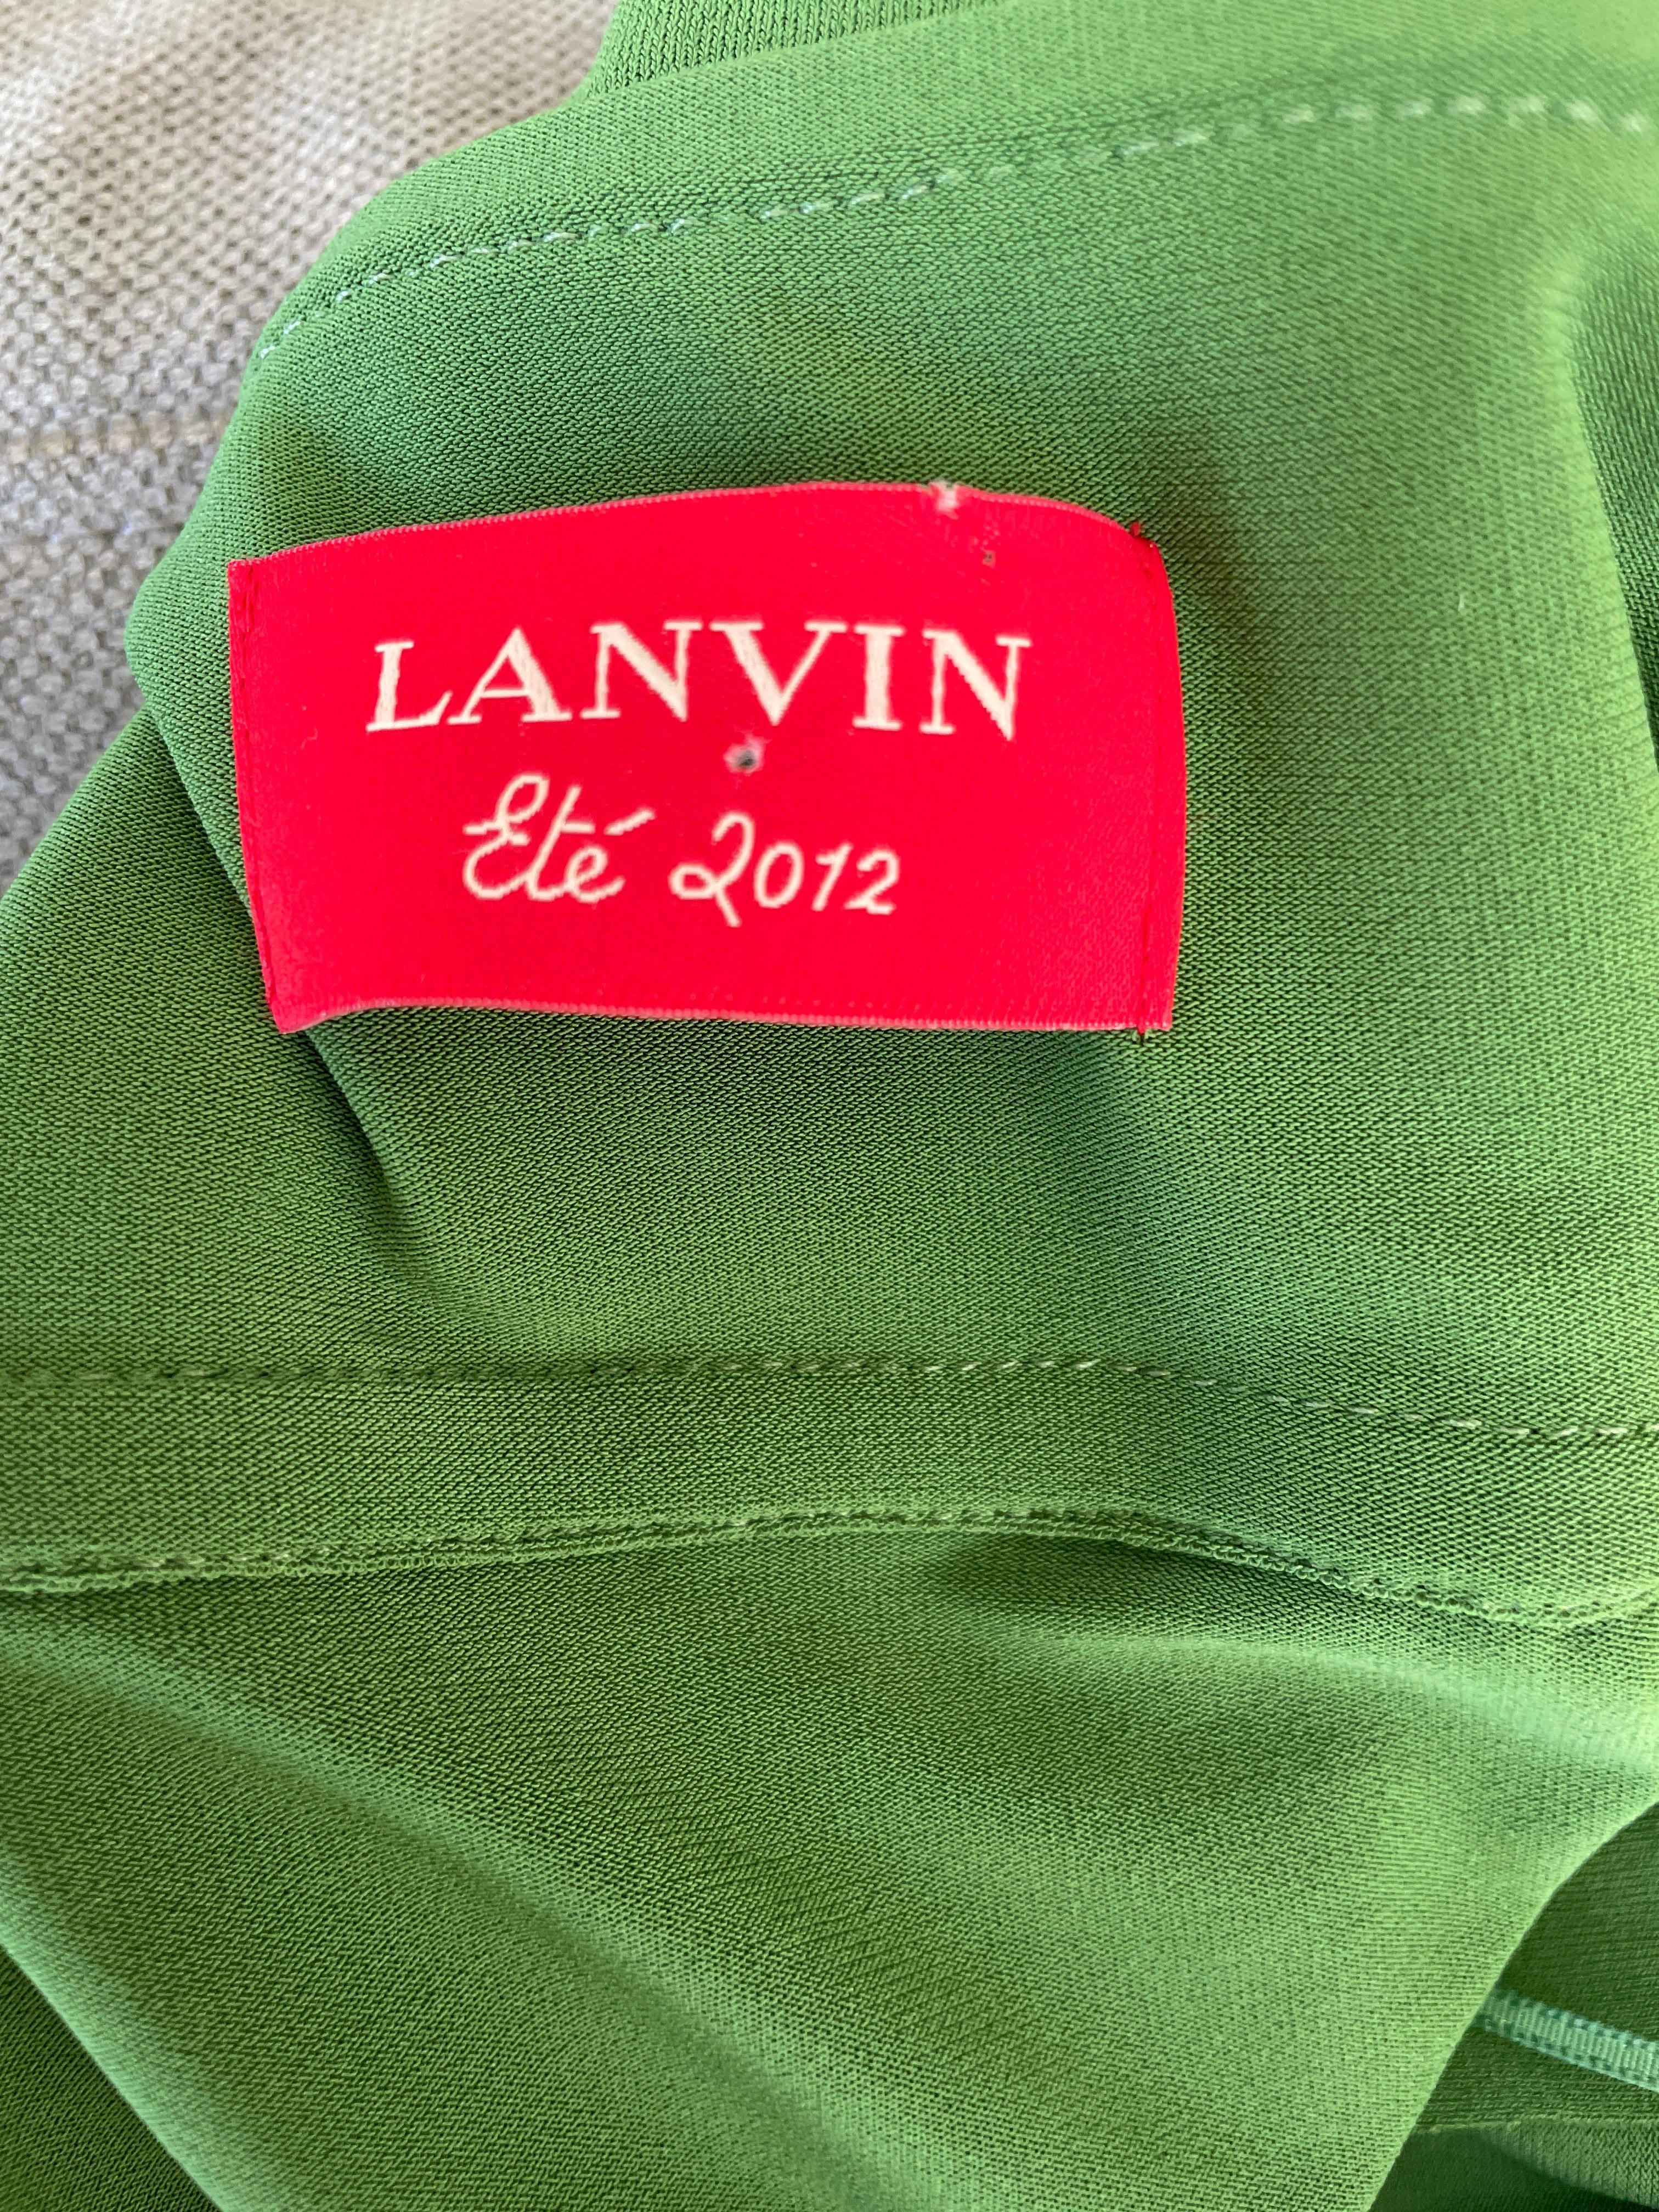 Women's Lanvin by Alber Elbaz Ruched Green One Shoulder Mini Dress from Spring 2012 For Sale